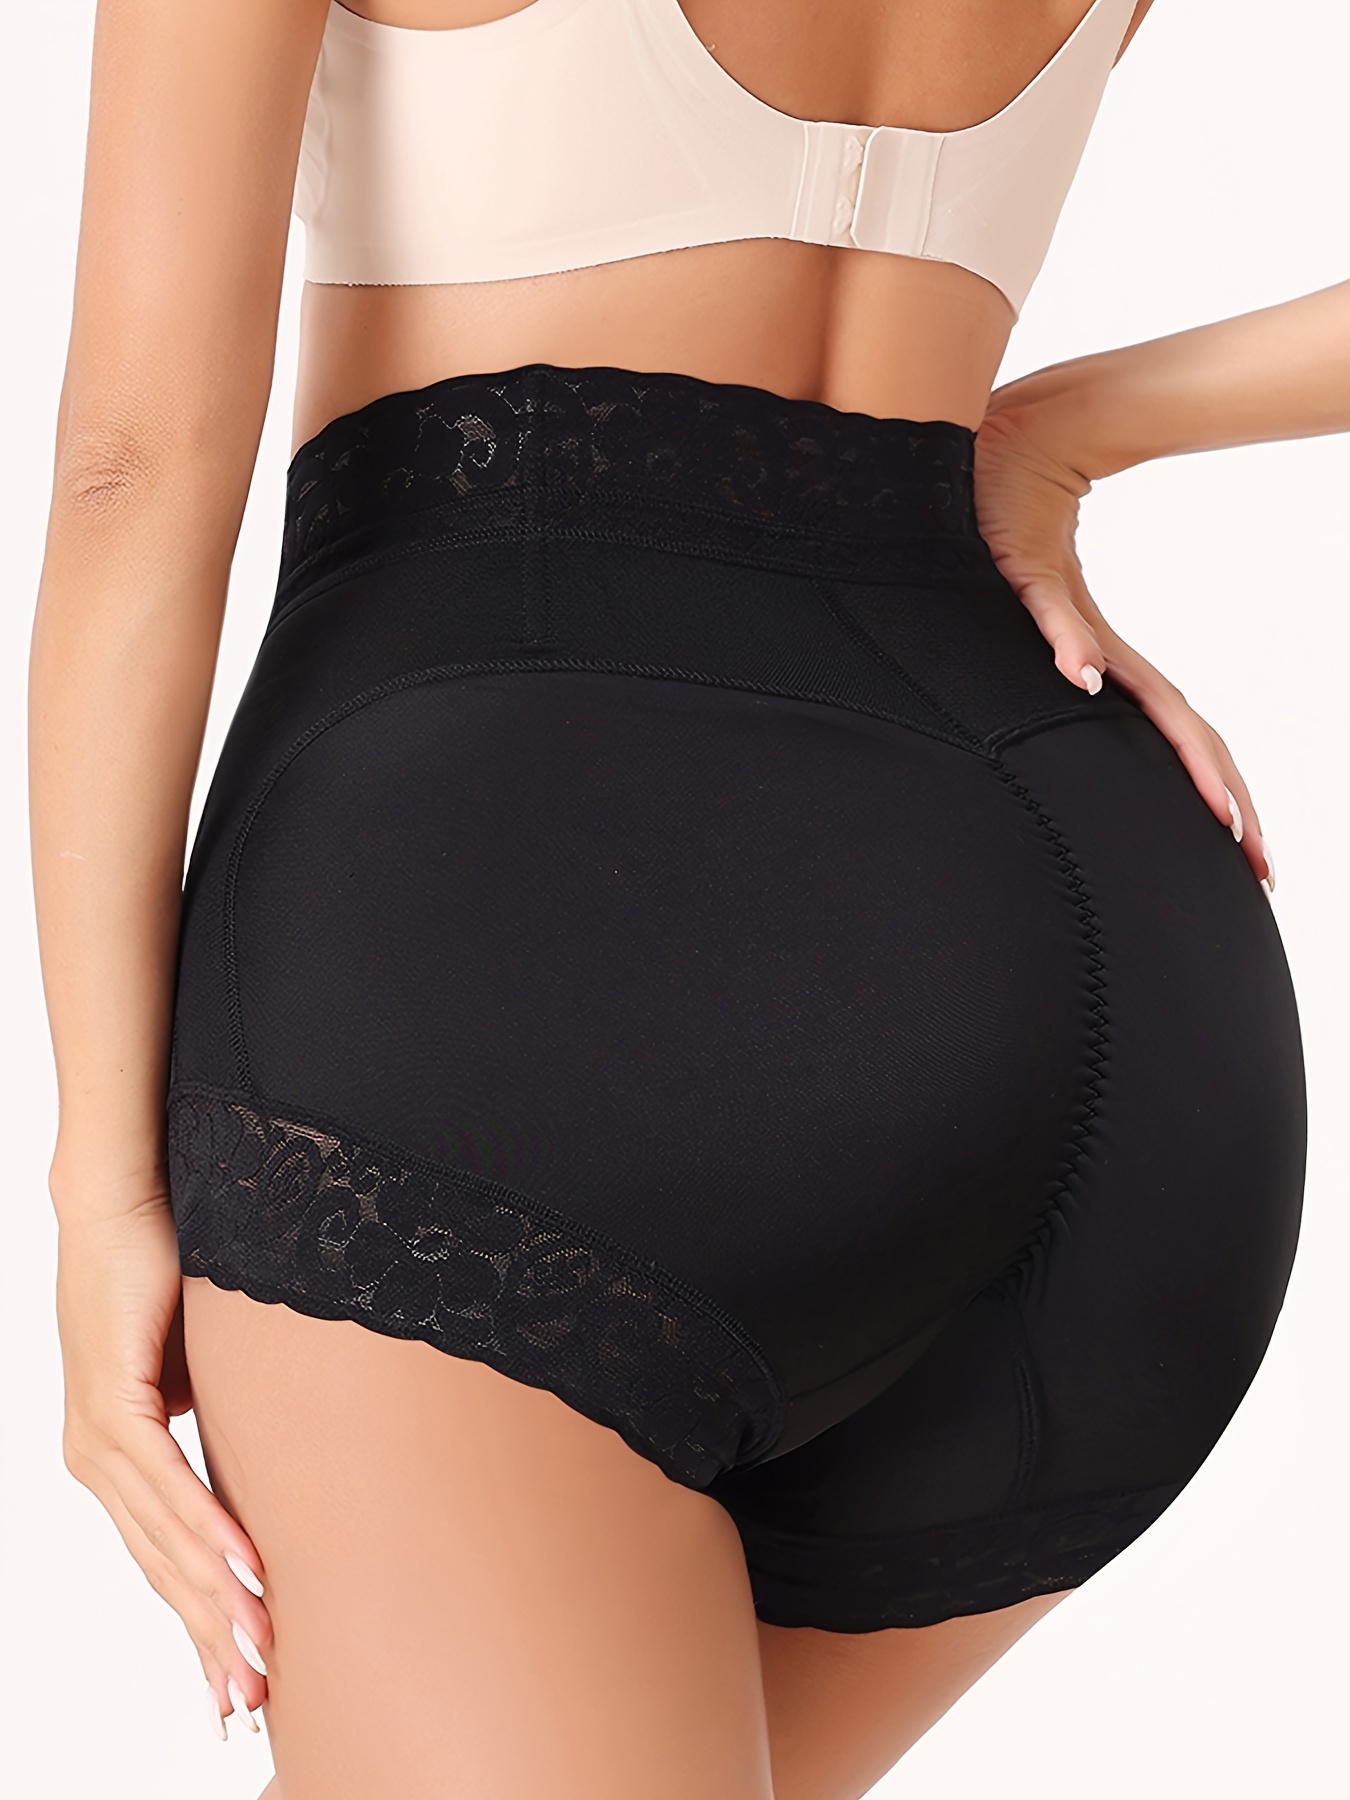 Plus Size Womens Butt Lifter Tummy Control Panties With Booty Lift